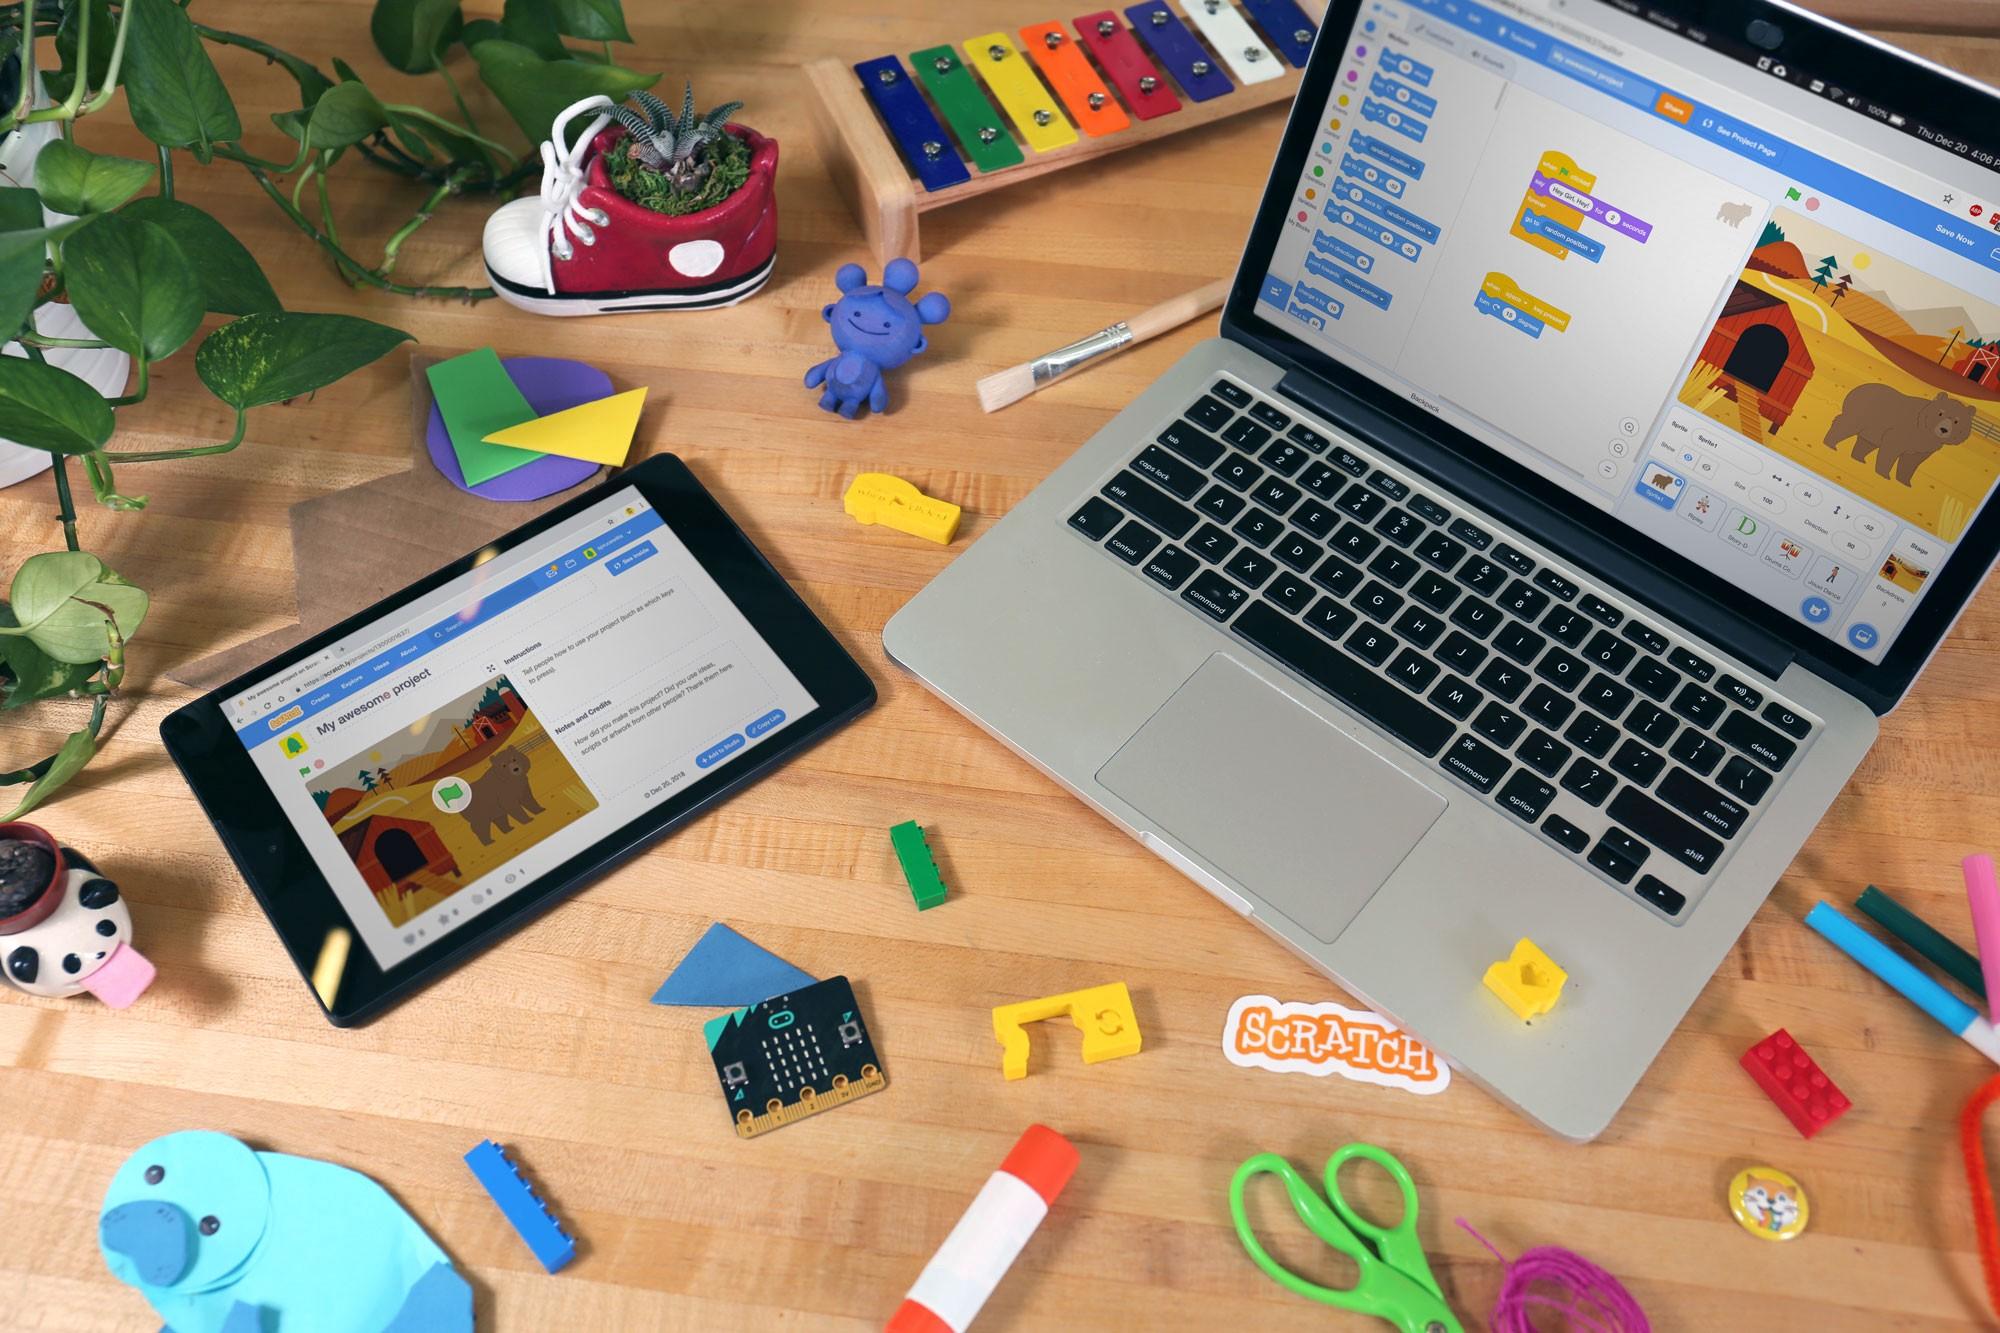 Introducing Scratch 3.0: Expanding the Creative Possibilities of Coding